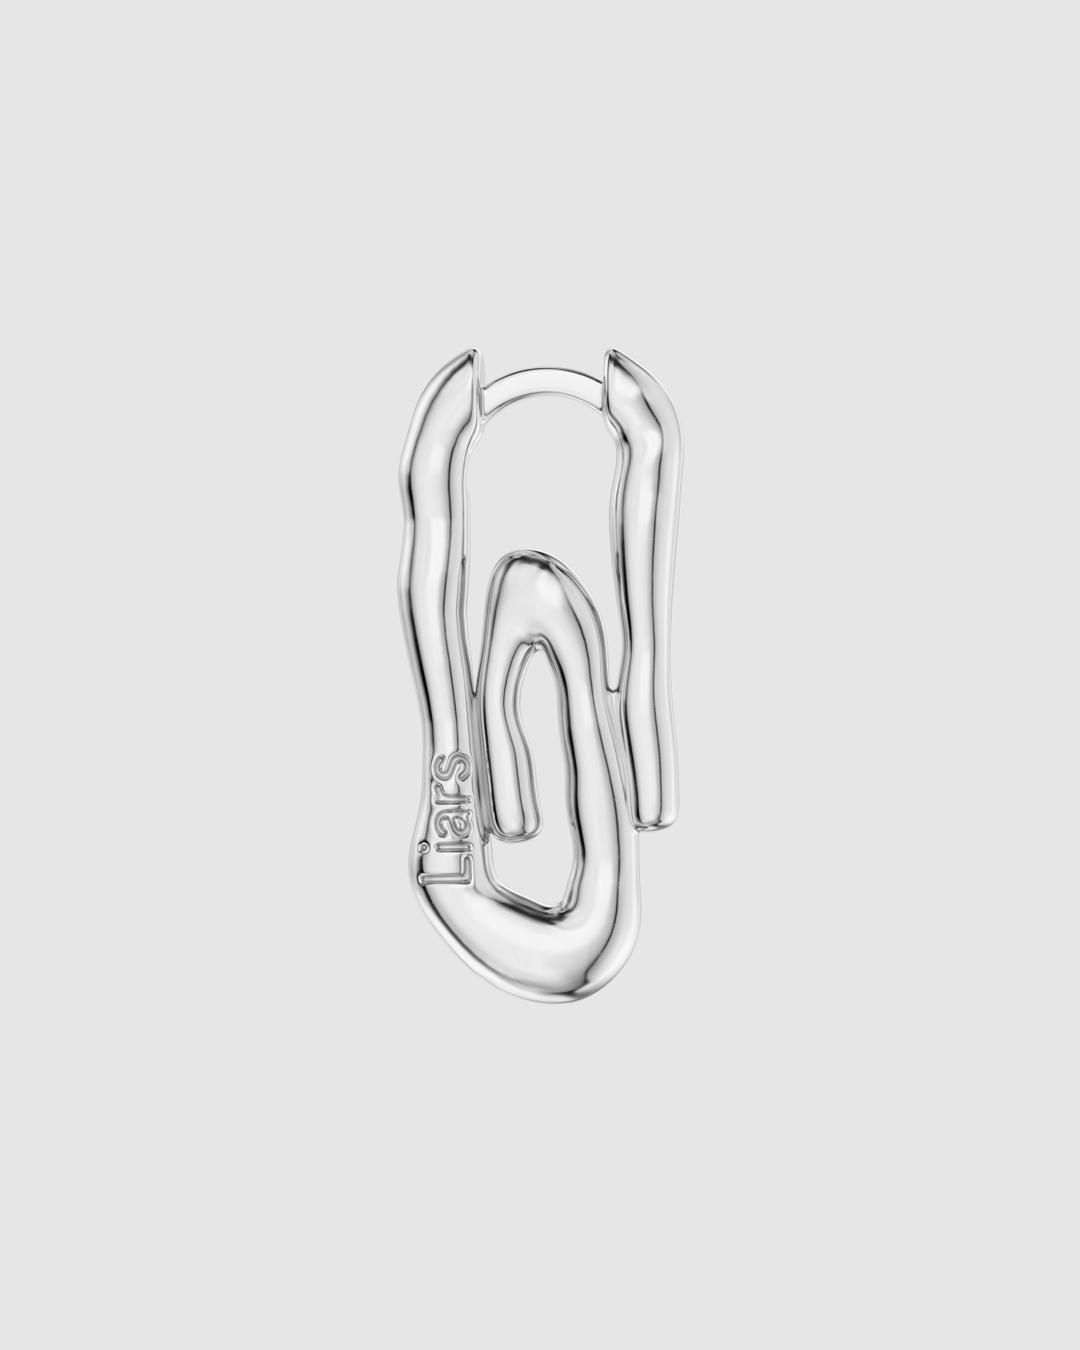 New Nature paper clip earring